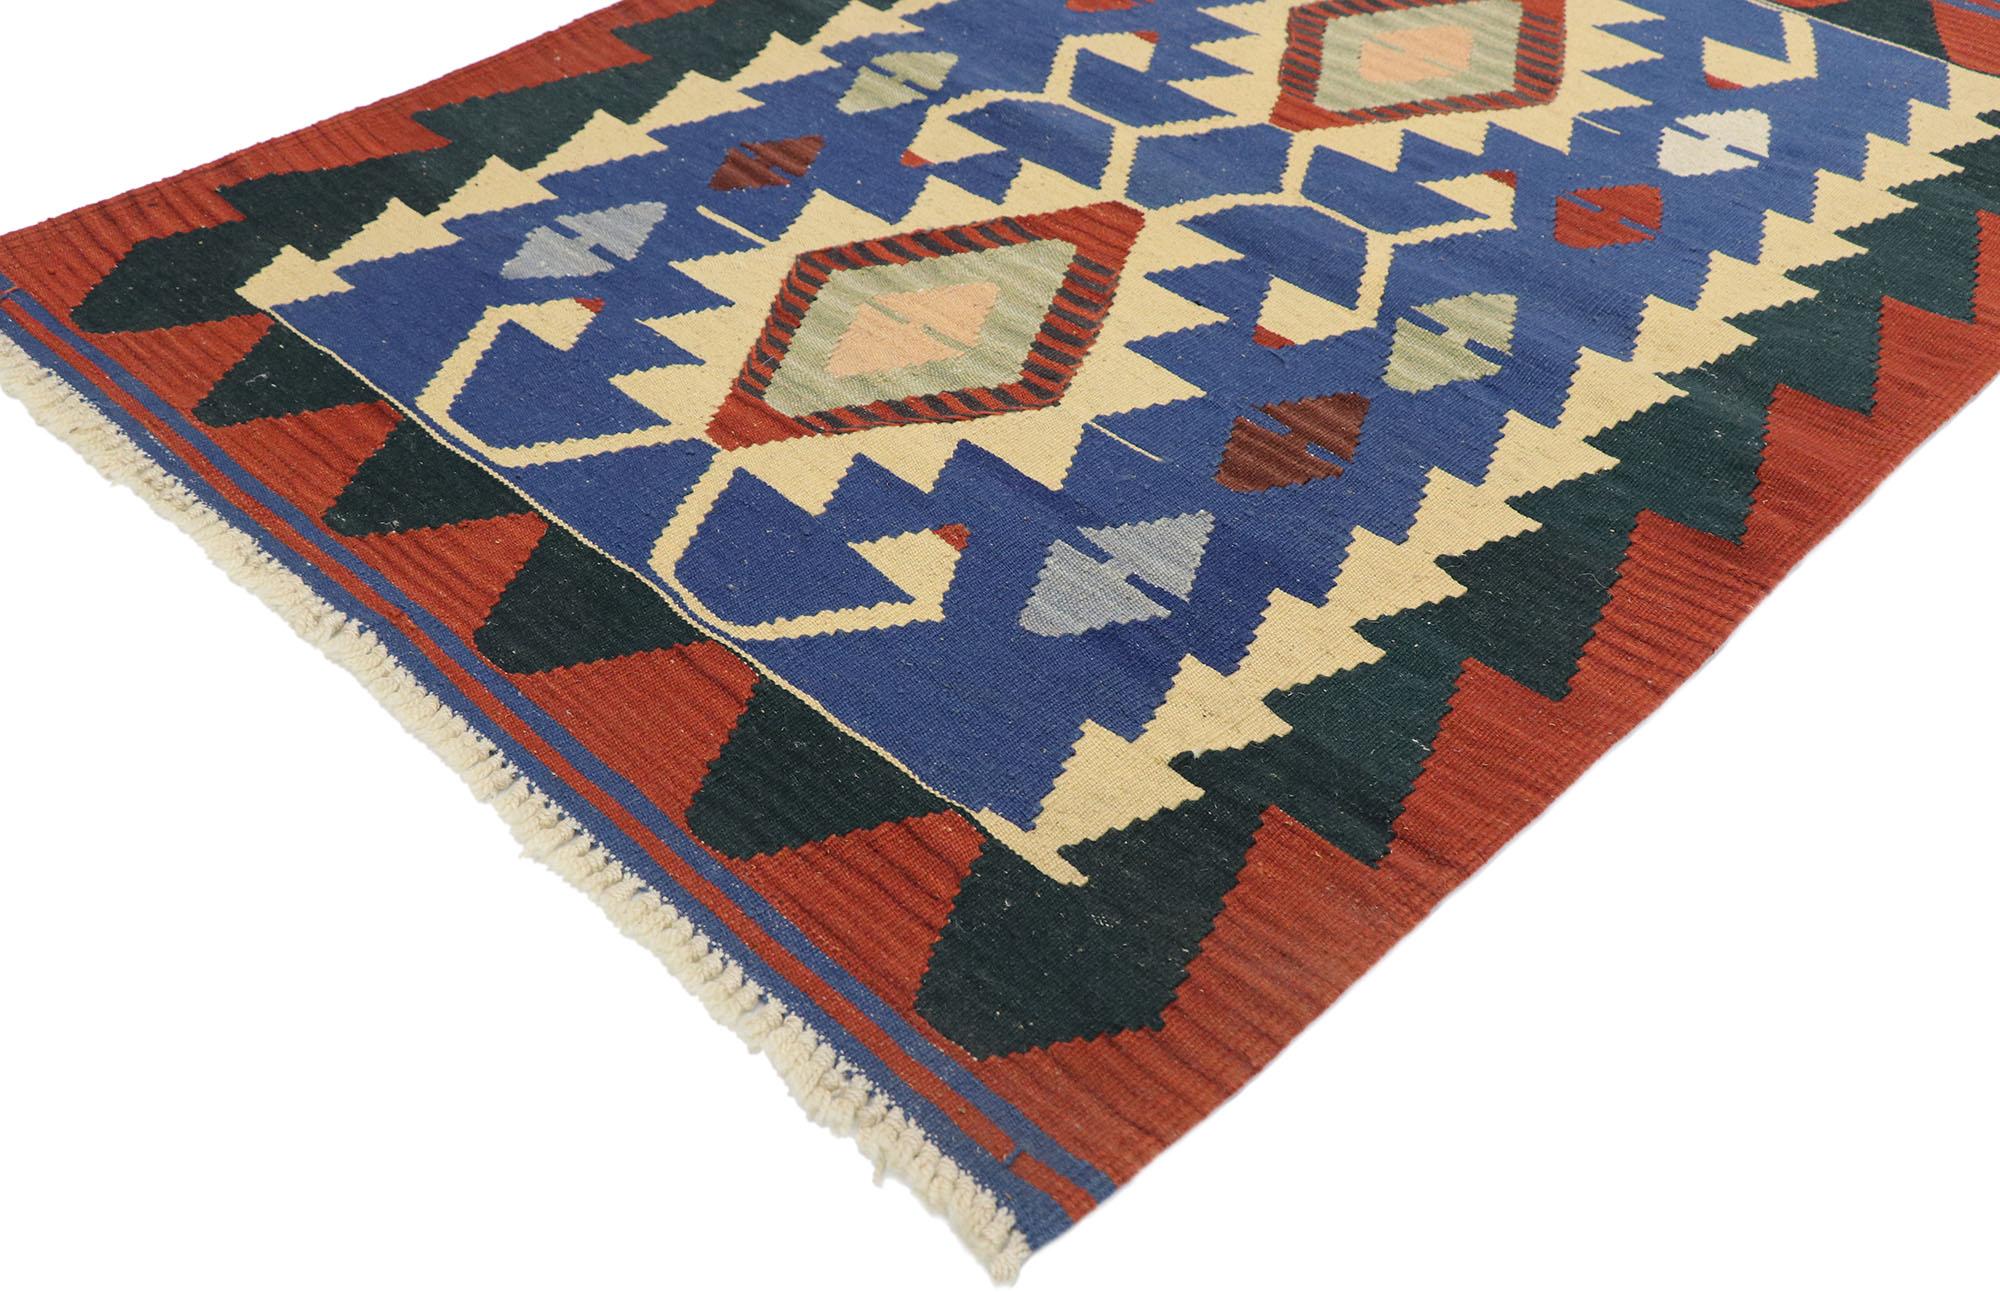 77841, vintage Persian Shiraz Kilim rug with Tribal style. Full of tiny details and a bold expressive design combined with vibrant colors and tribal style, this hand-woven wool vintage Persian Shiraz kilim rug is a captivating vision of woven